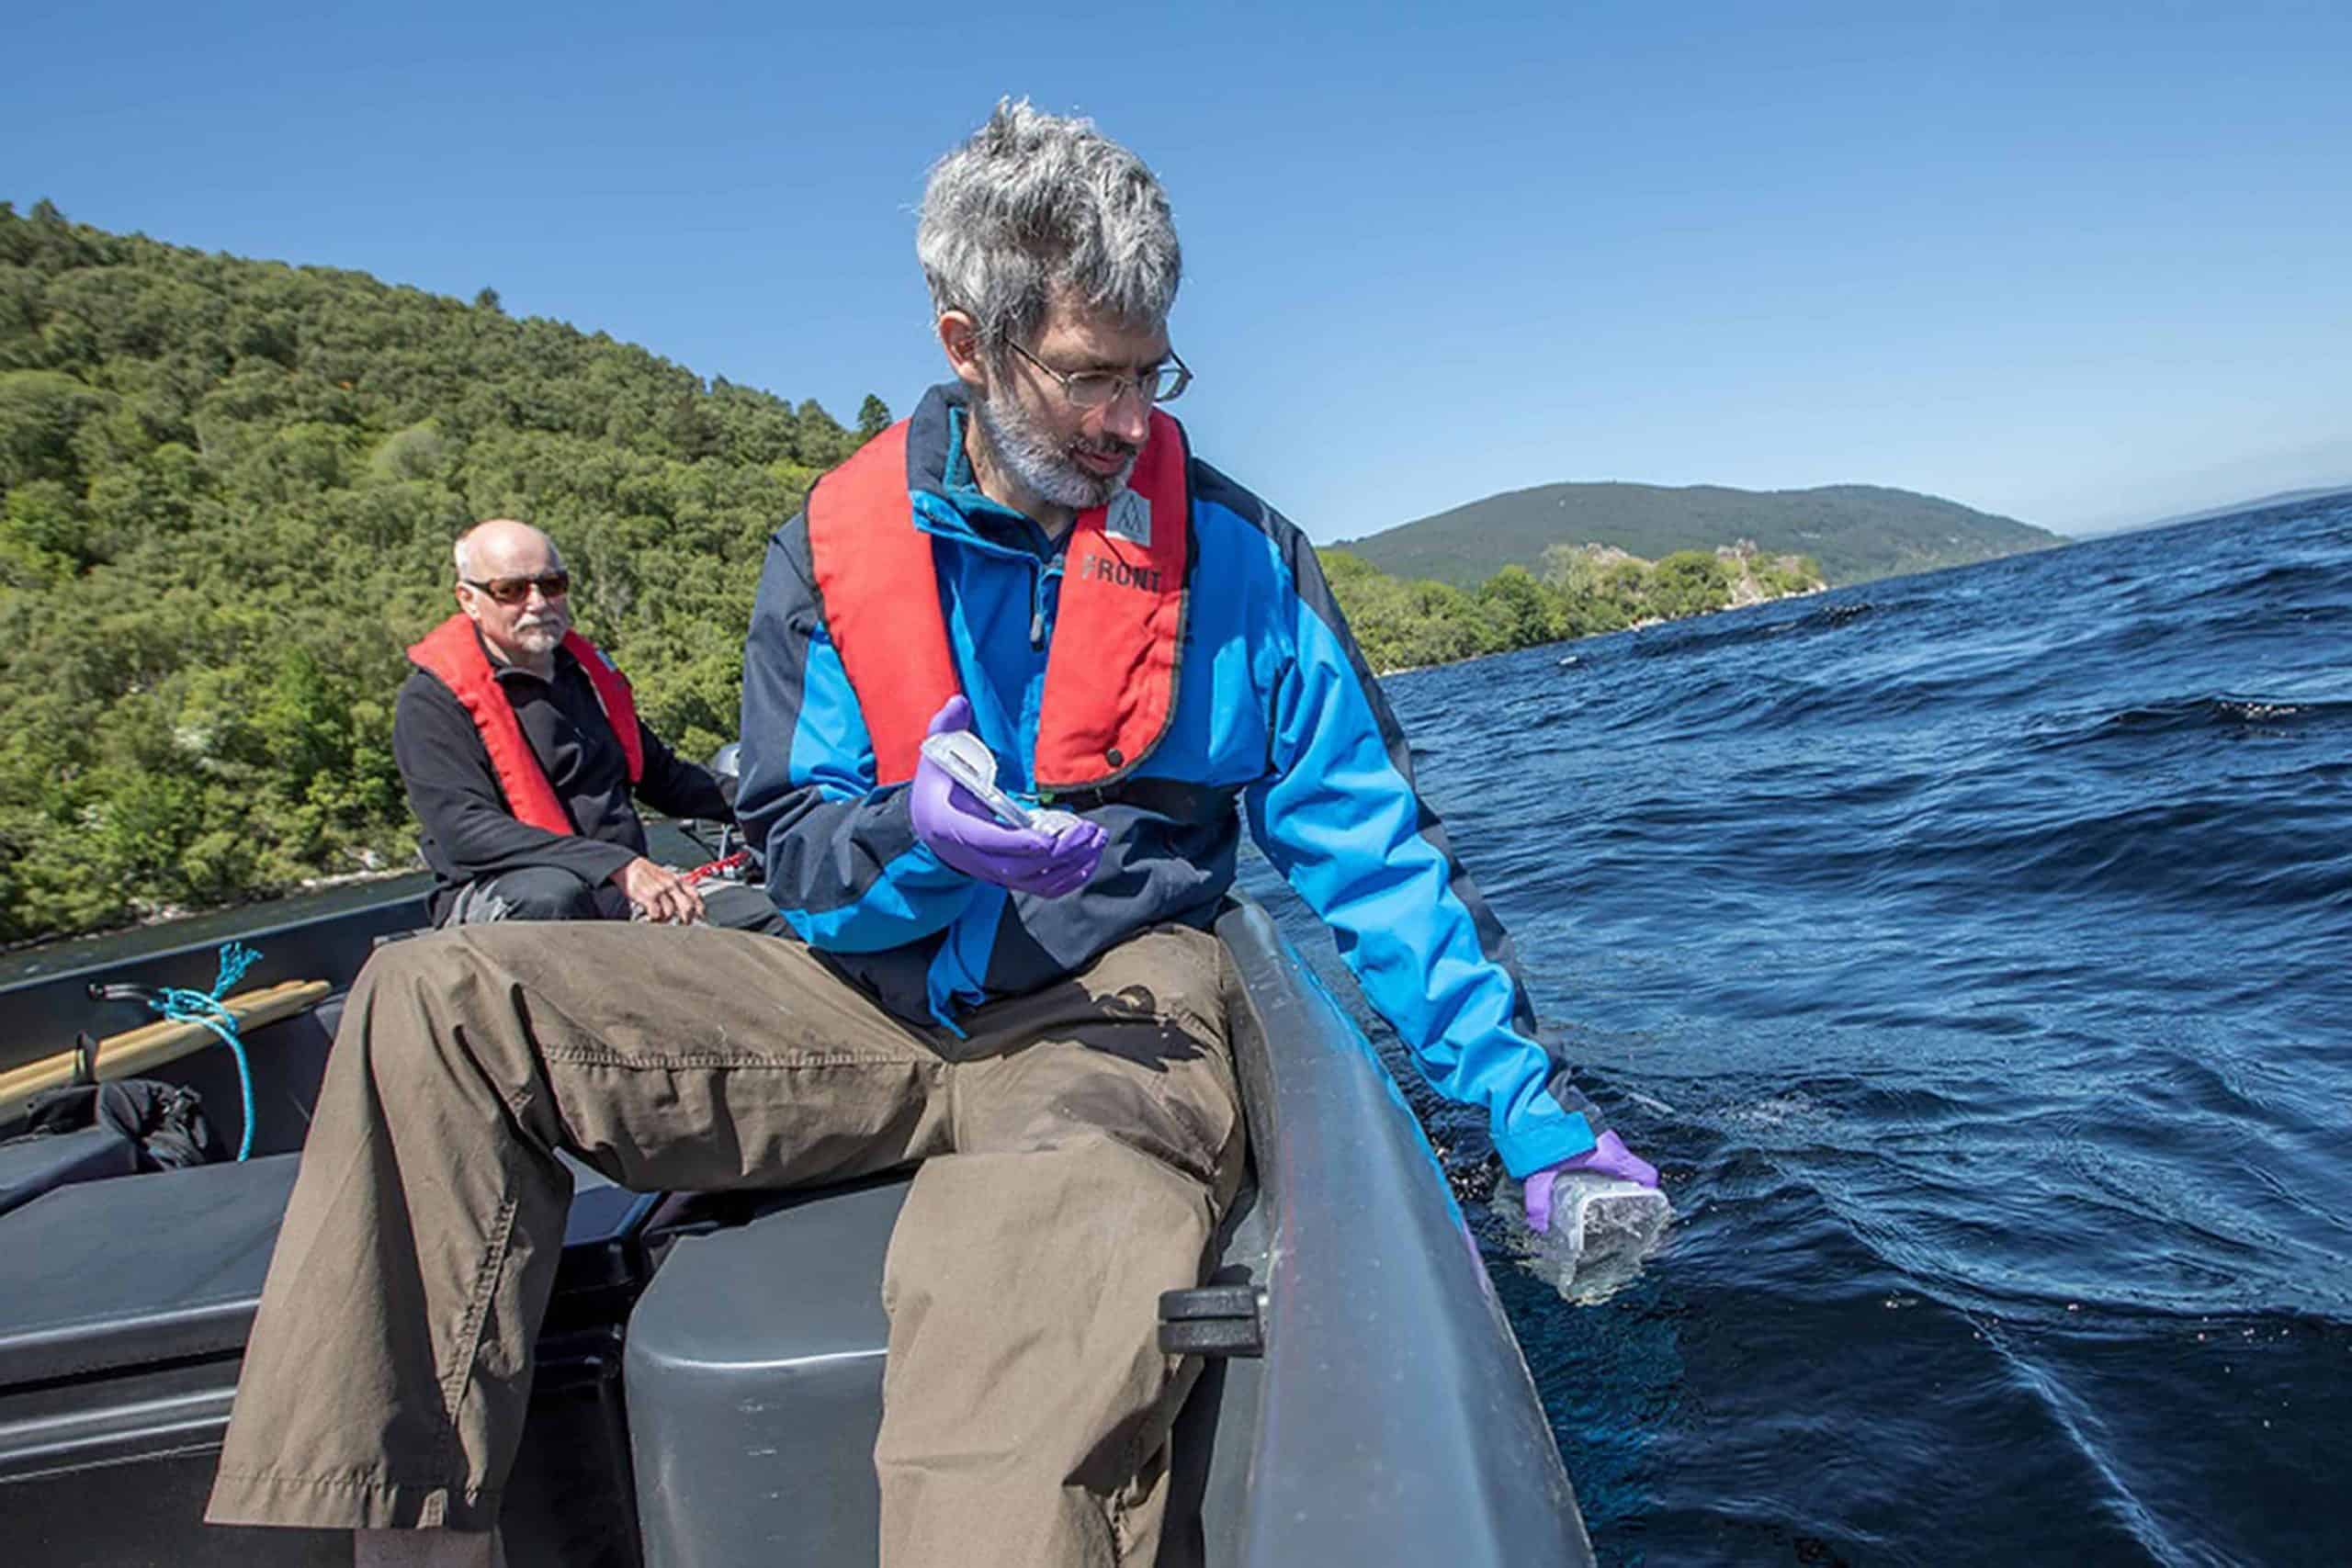 One Loch Ness monster theory remains plausible, scientist says